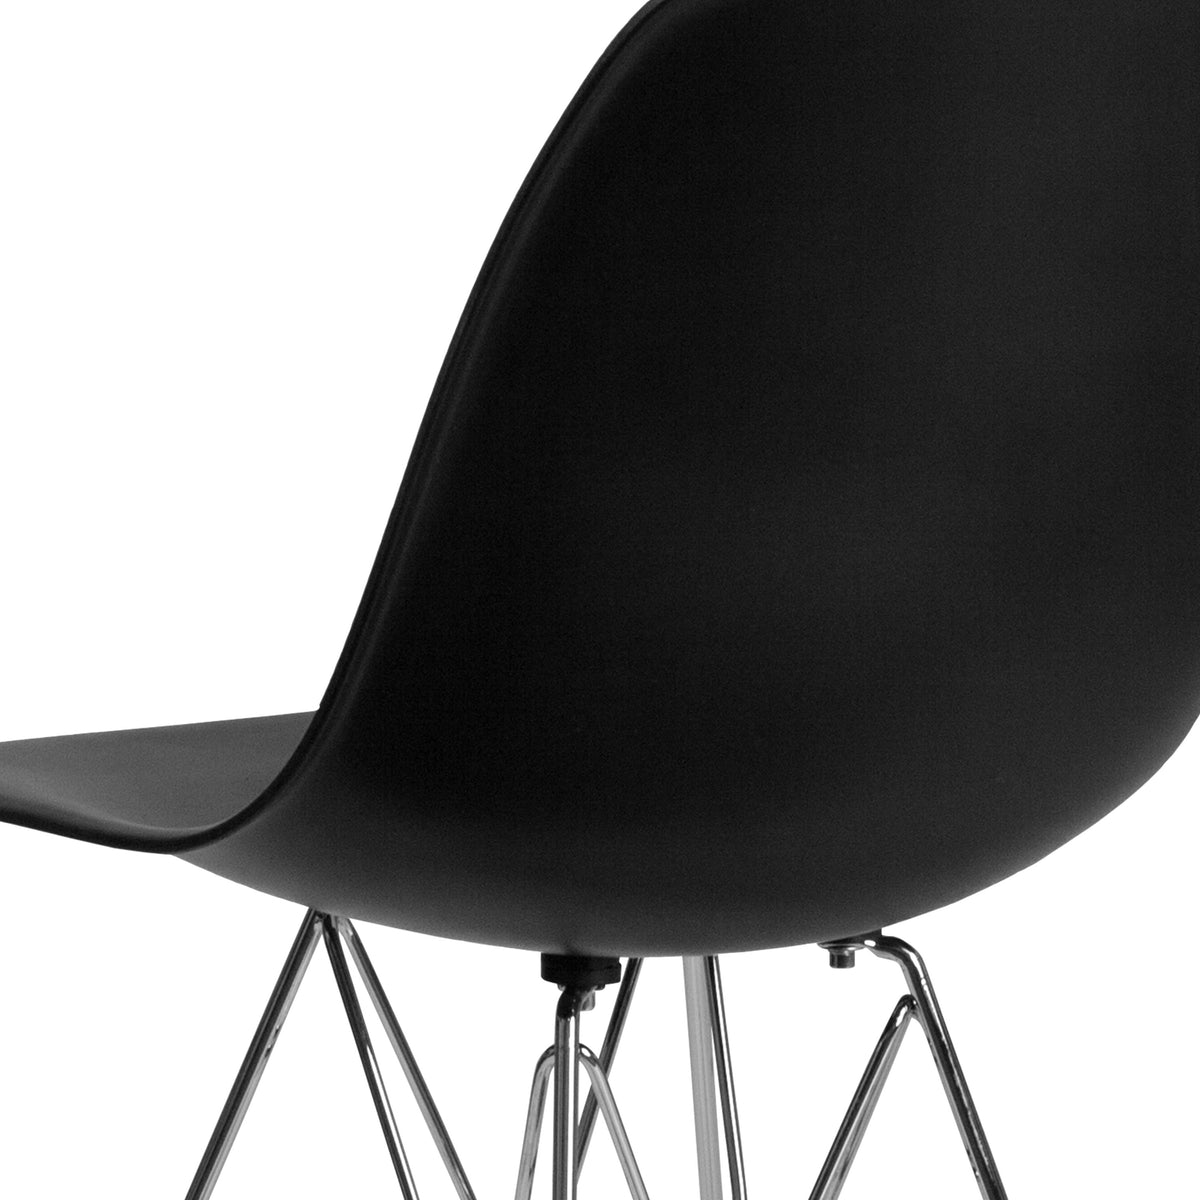 Black |#| Black Plastic Chair w/ Chrome Base - Hospitality Seating - Accent and Side Chair